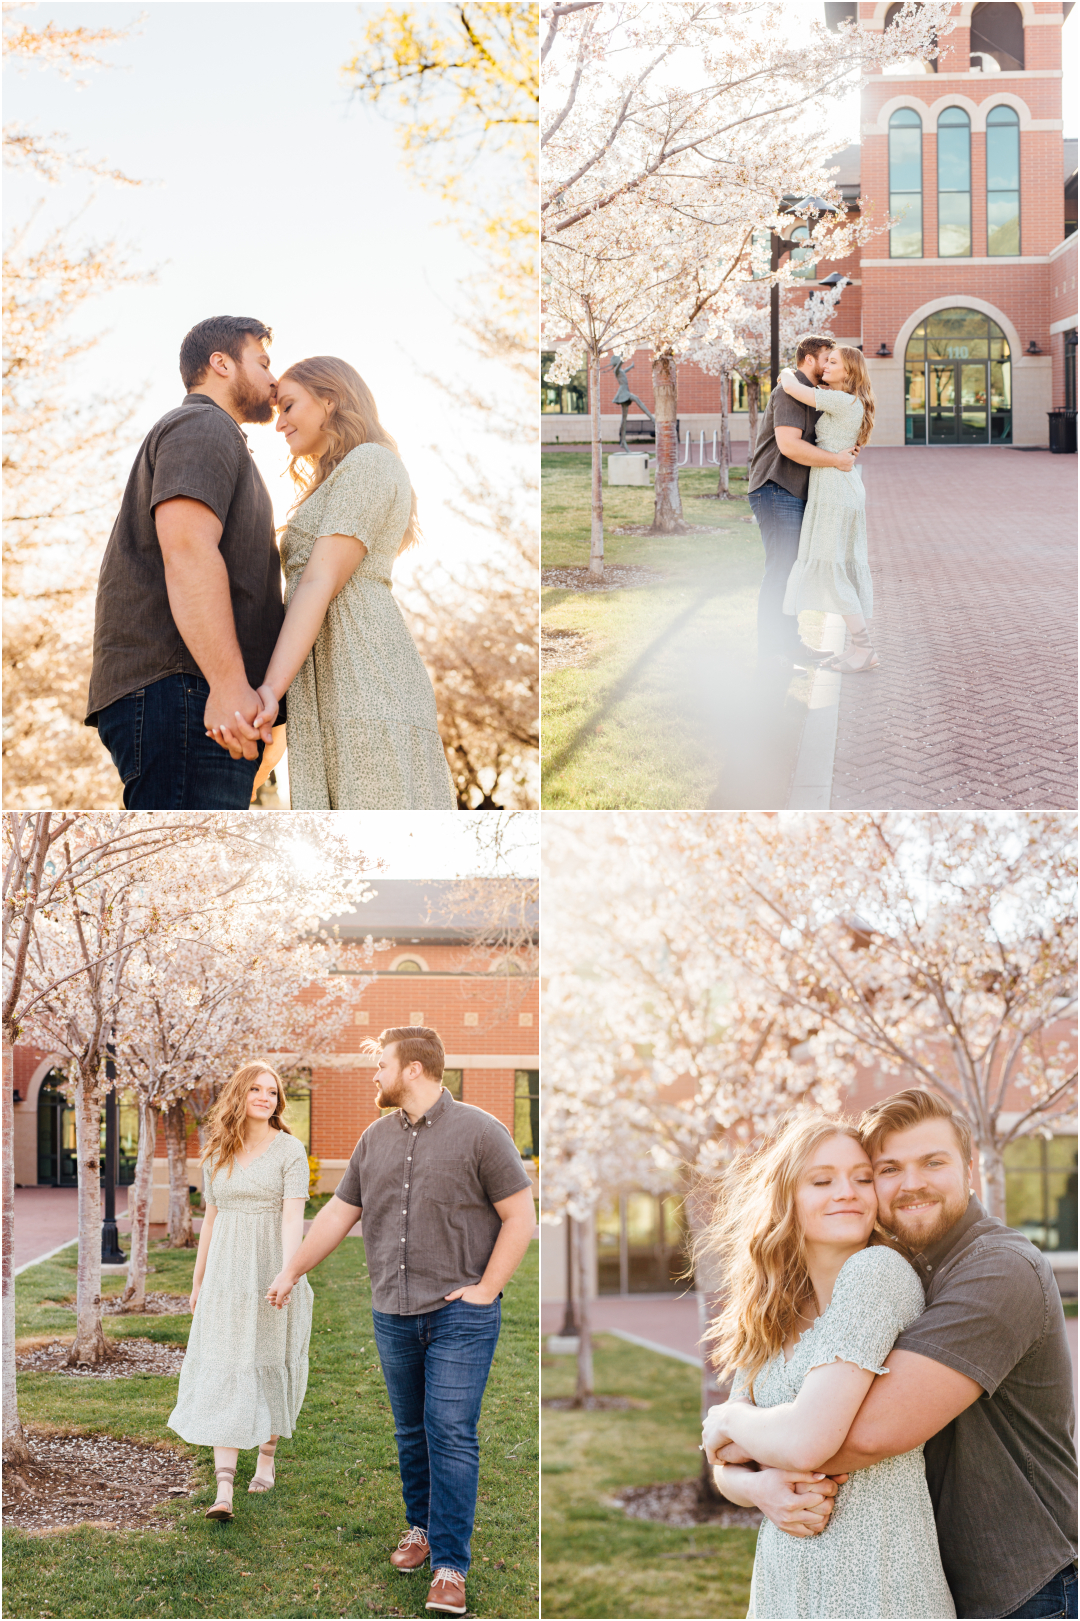 Utah Spring Family Photography Locations in Utah County - Springville Blossoms